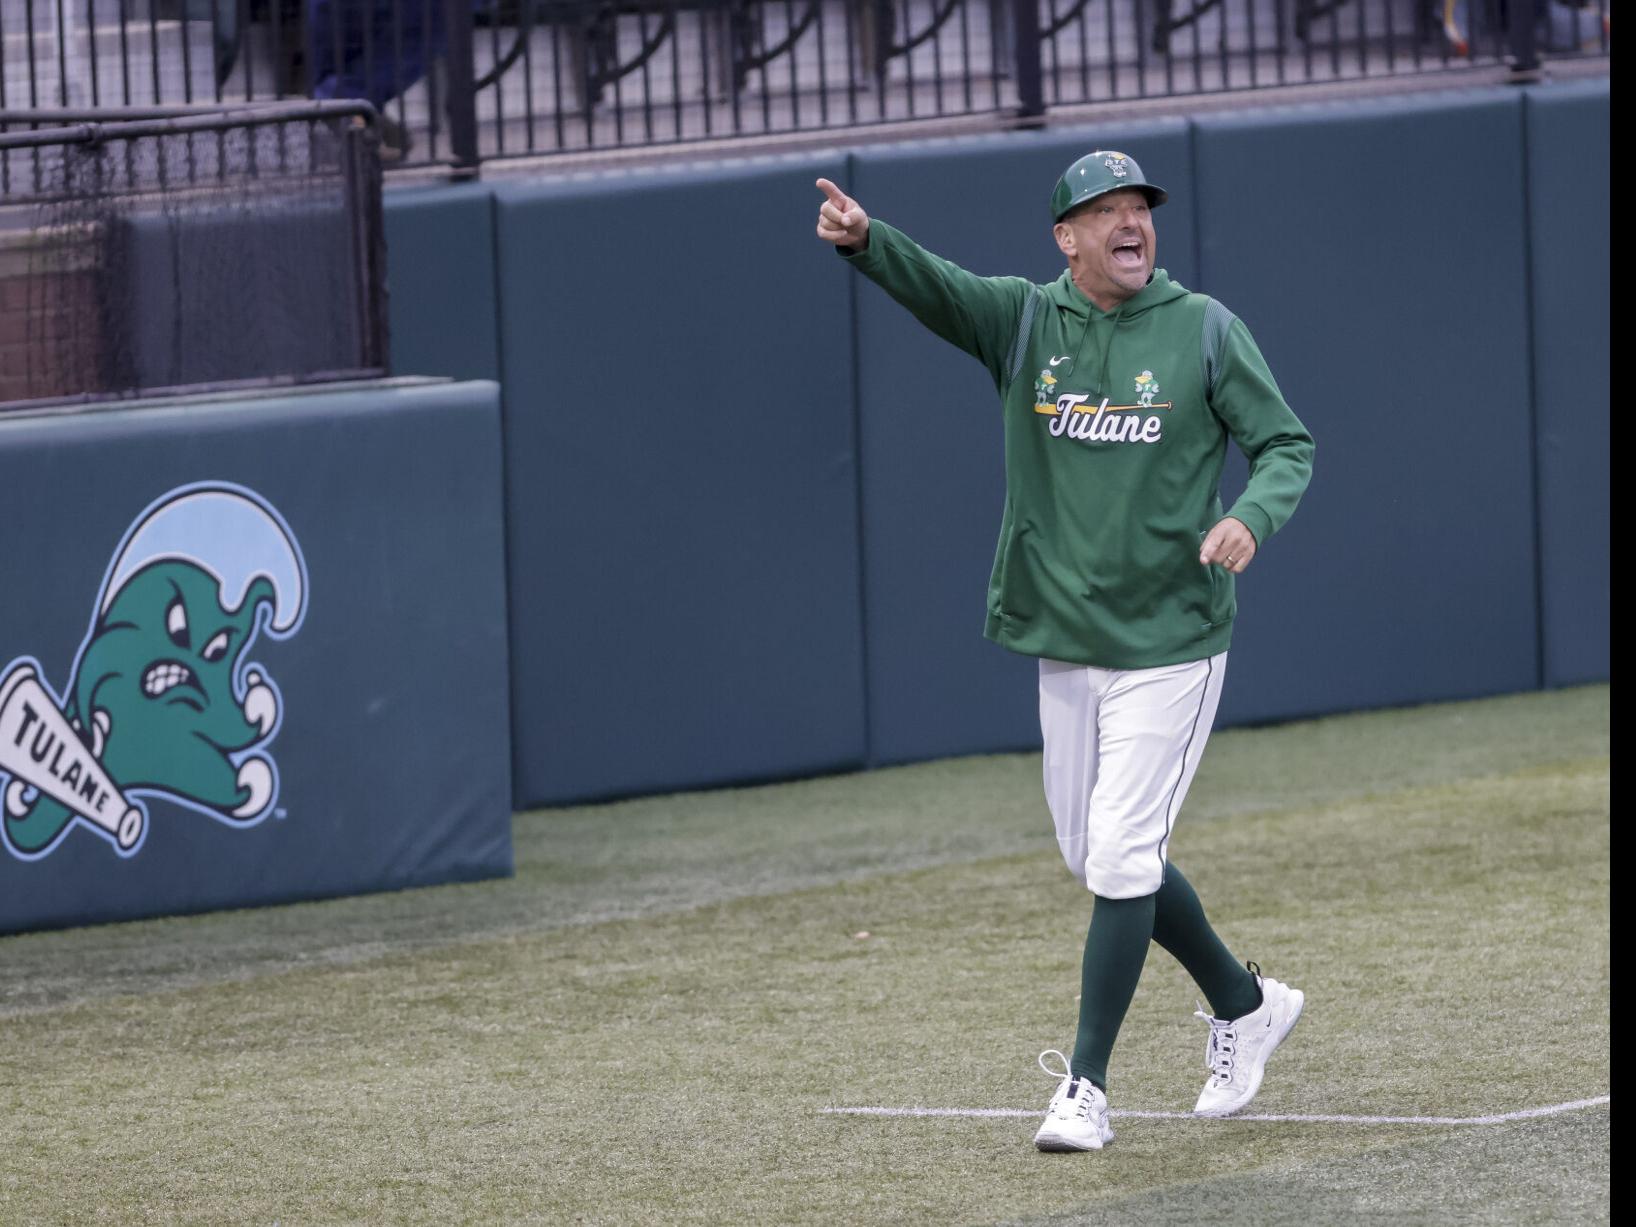 Tulane pitcher Ricky Castro is enjoying a solid, commanding year